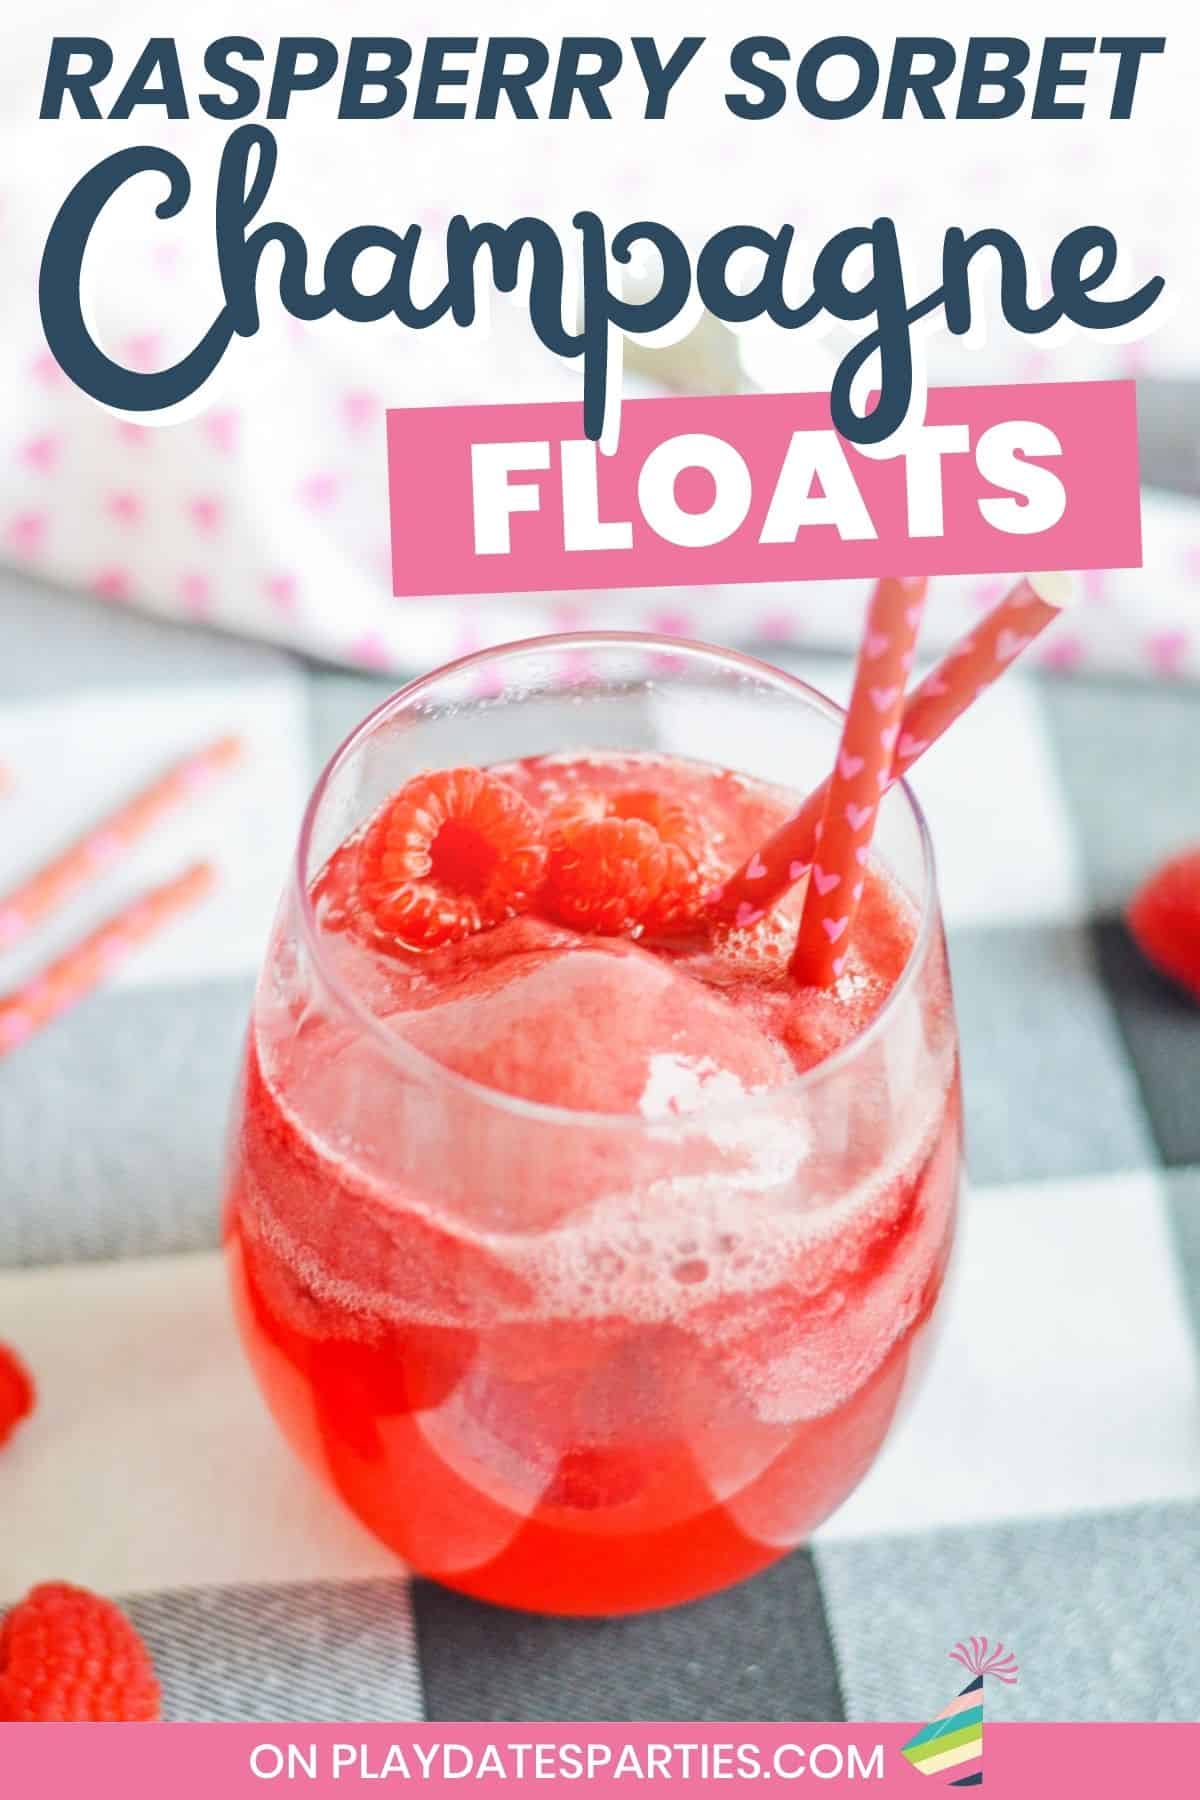 A bright pink champagne cocktail with text overlay raspberry sorbet champagne floats.